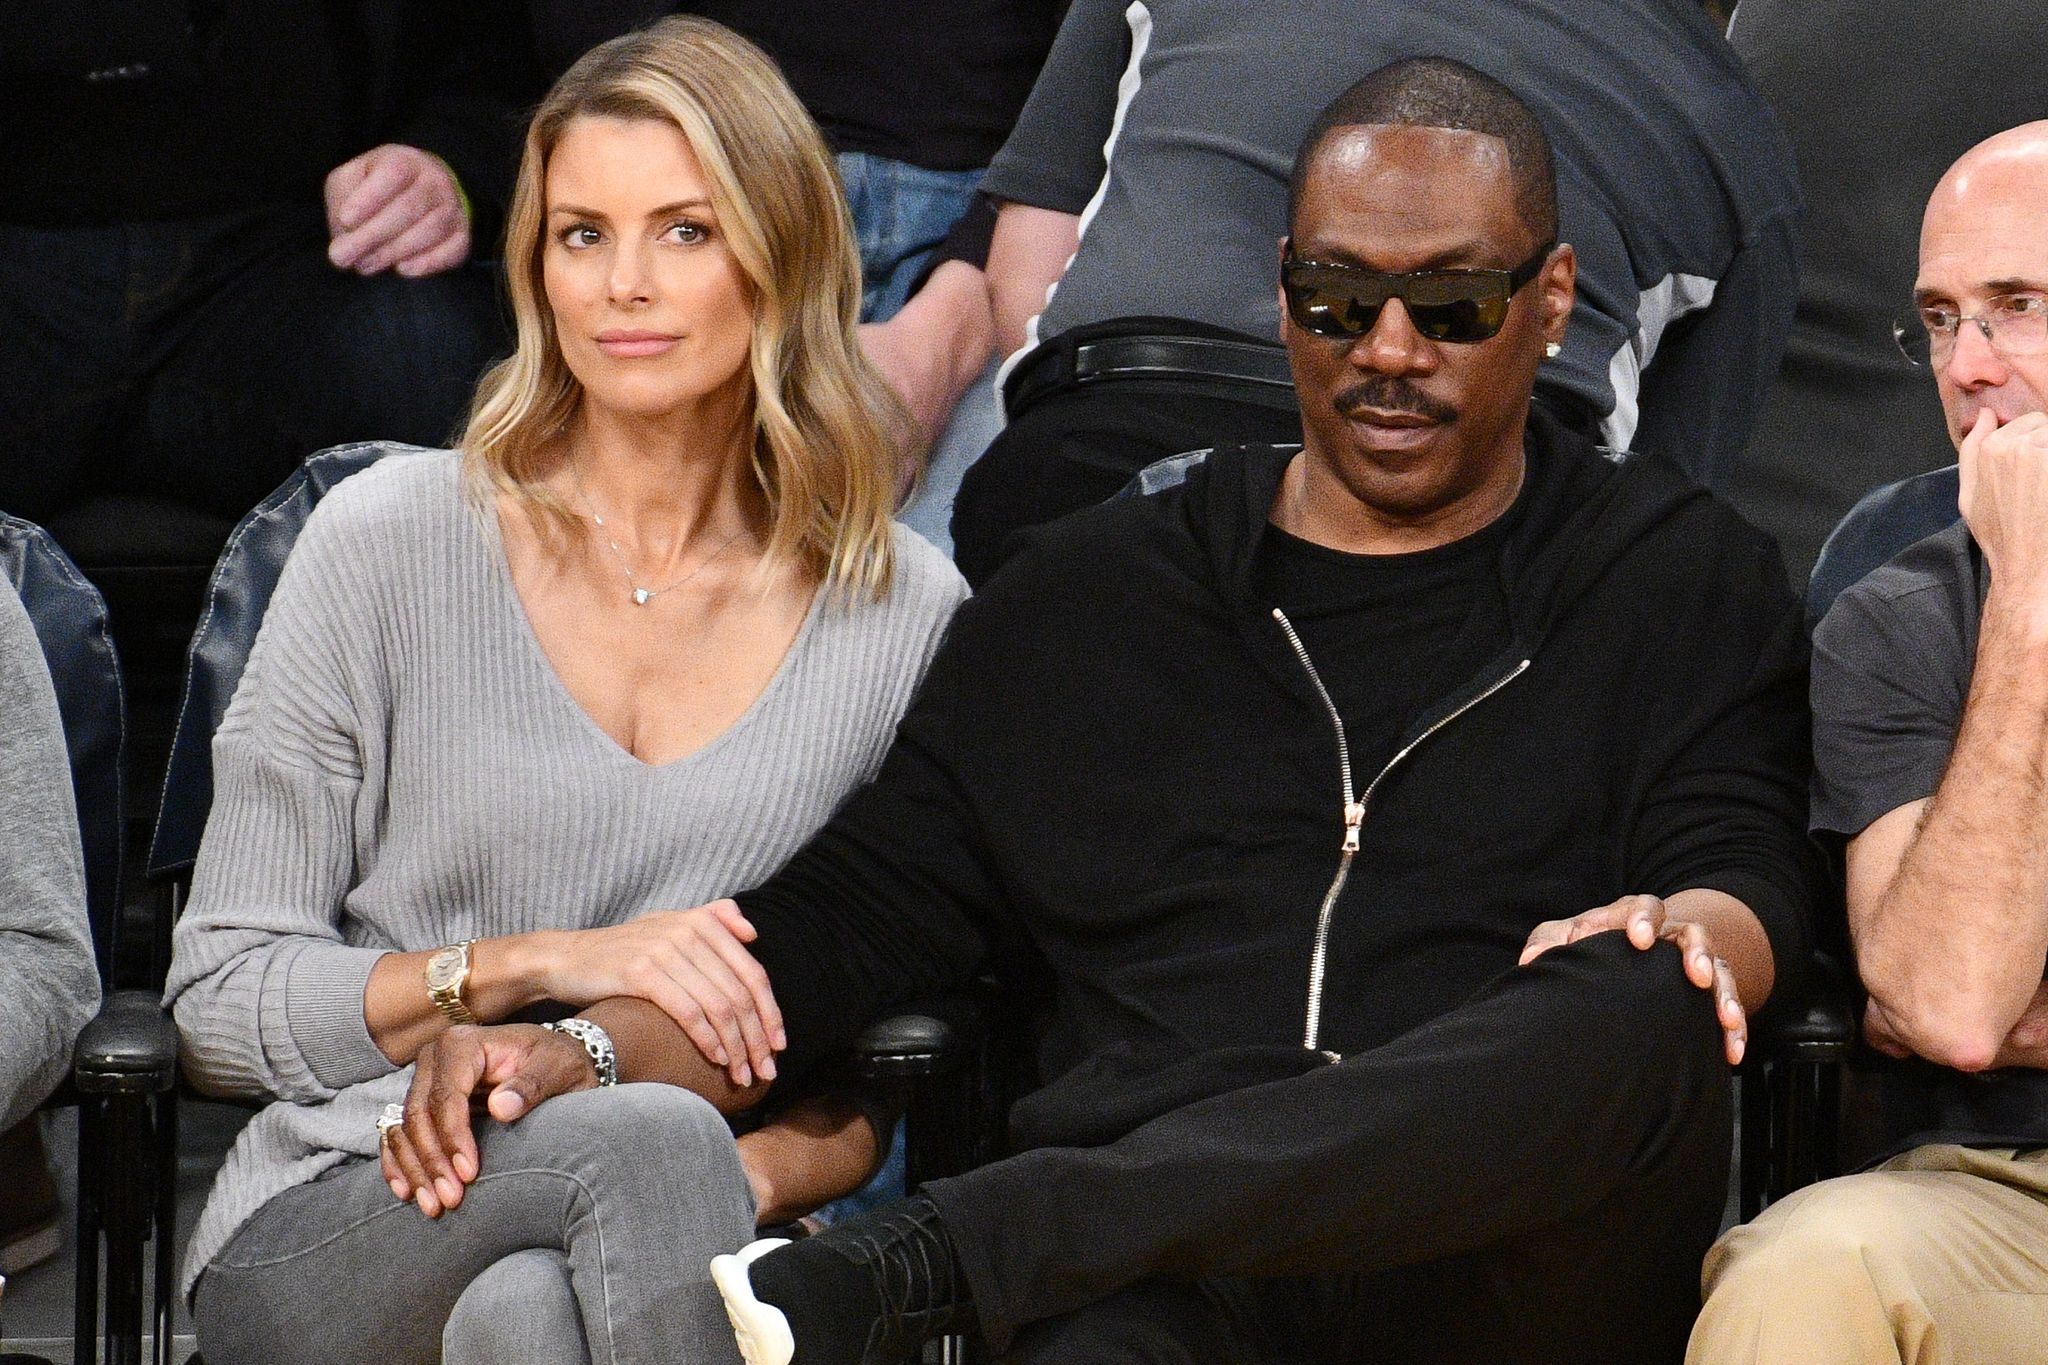 Eddie Murphy and Paige Butcher at a basketball game between the Lakers and the Utah Jazz in 2018 in Los Angeles | Source: Getty Images